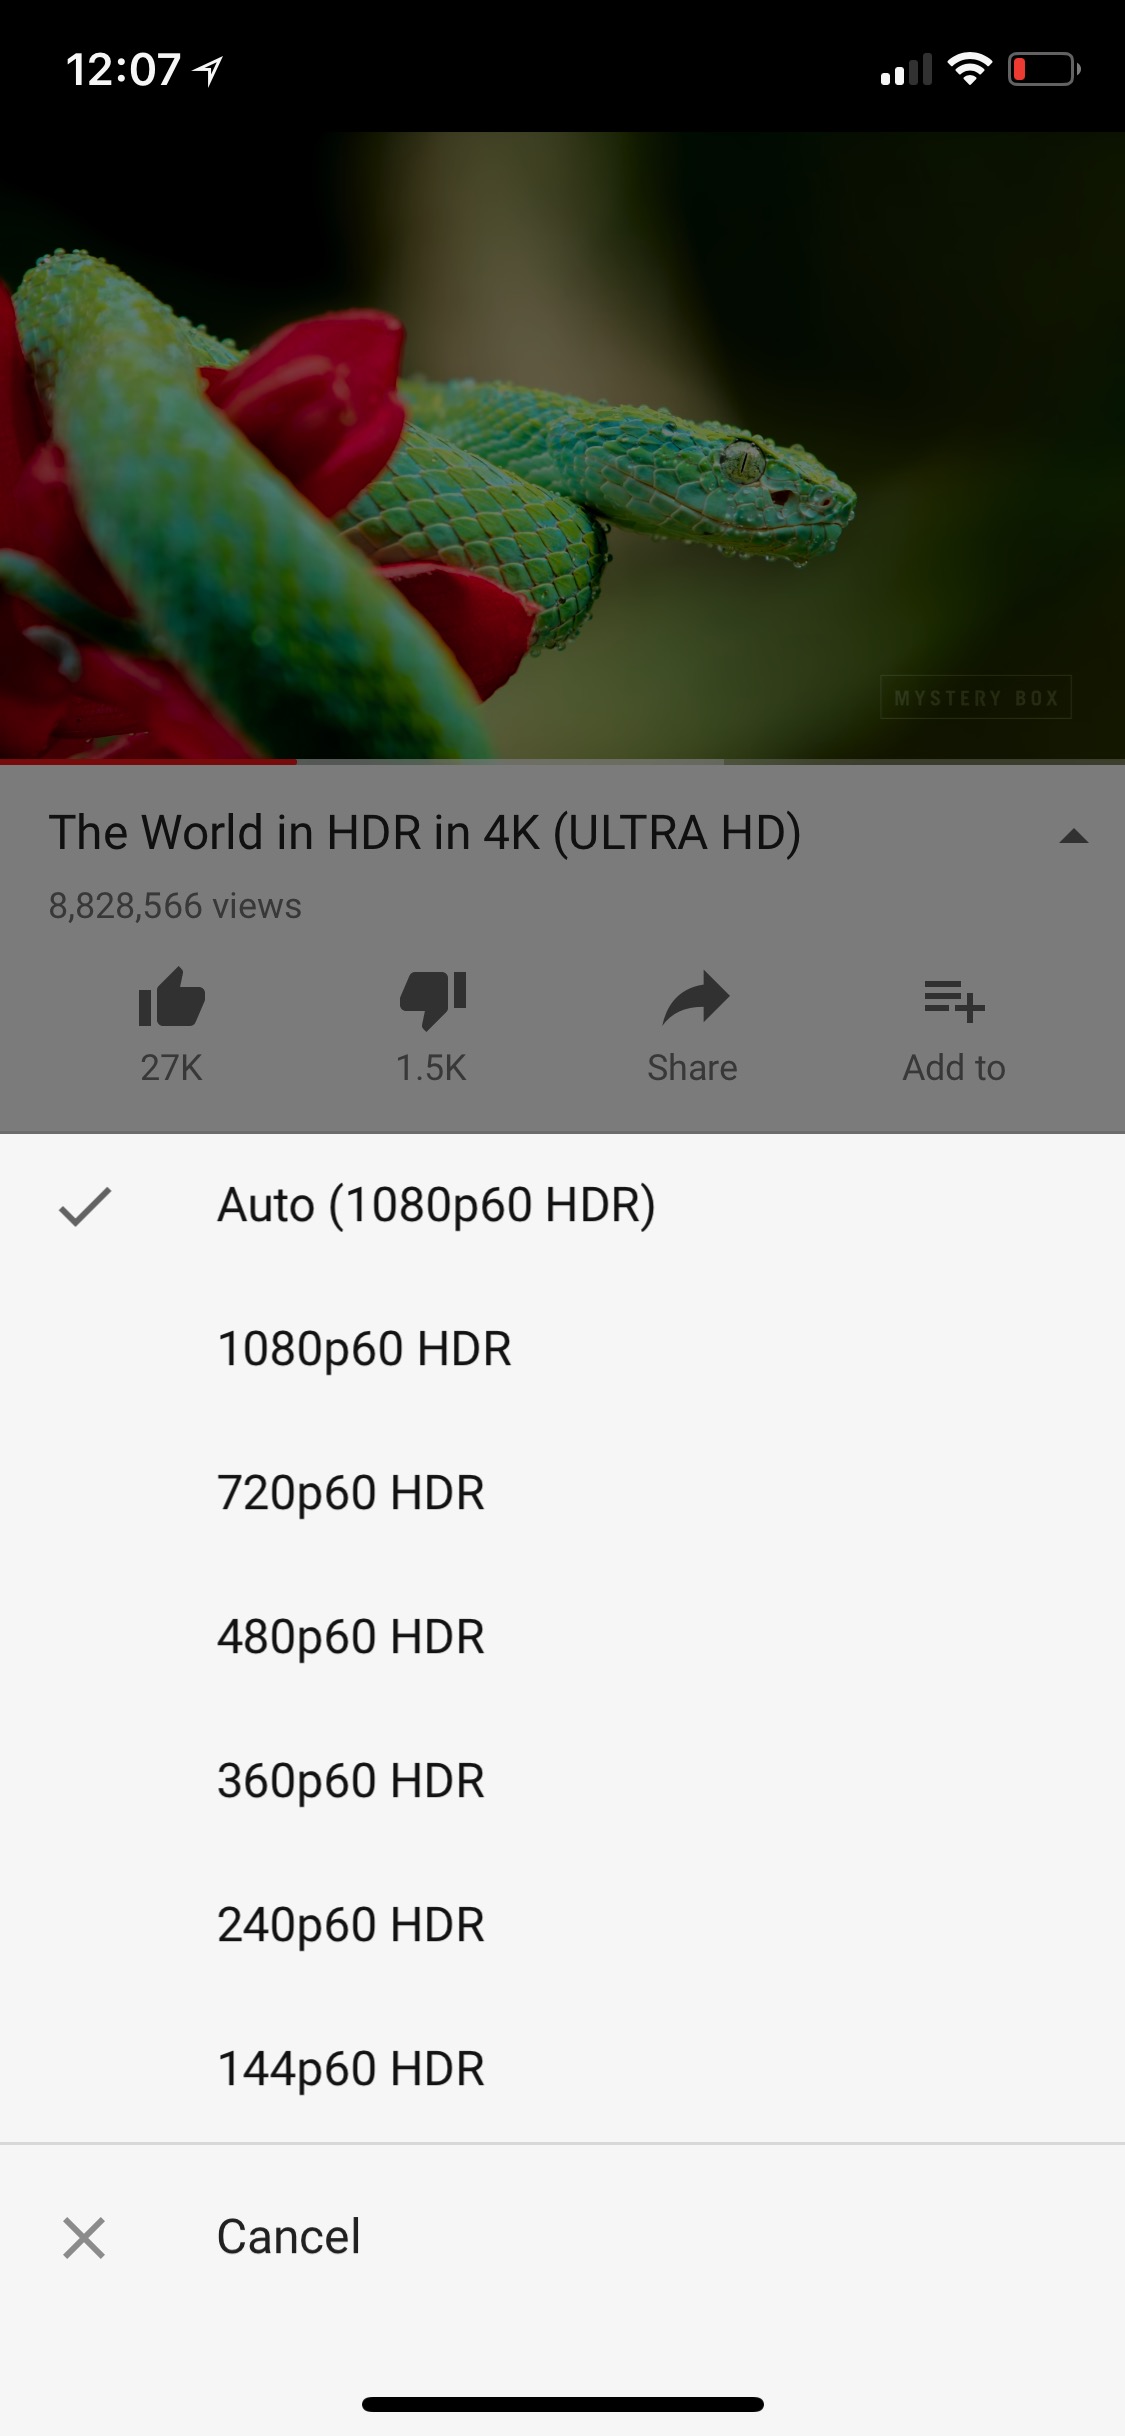 YouTube App Now Supports HDR on iPhone X